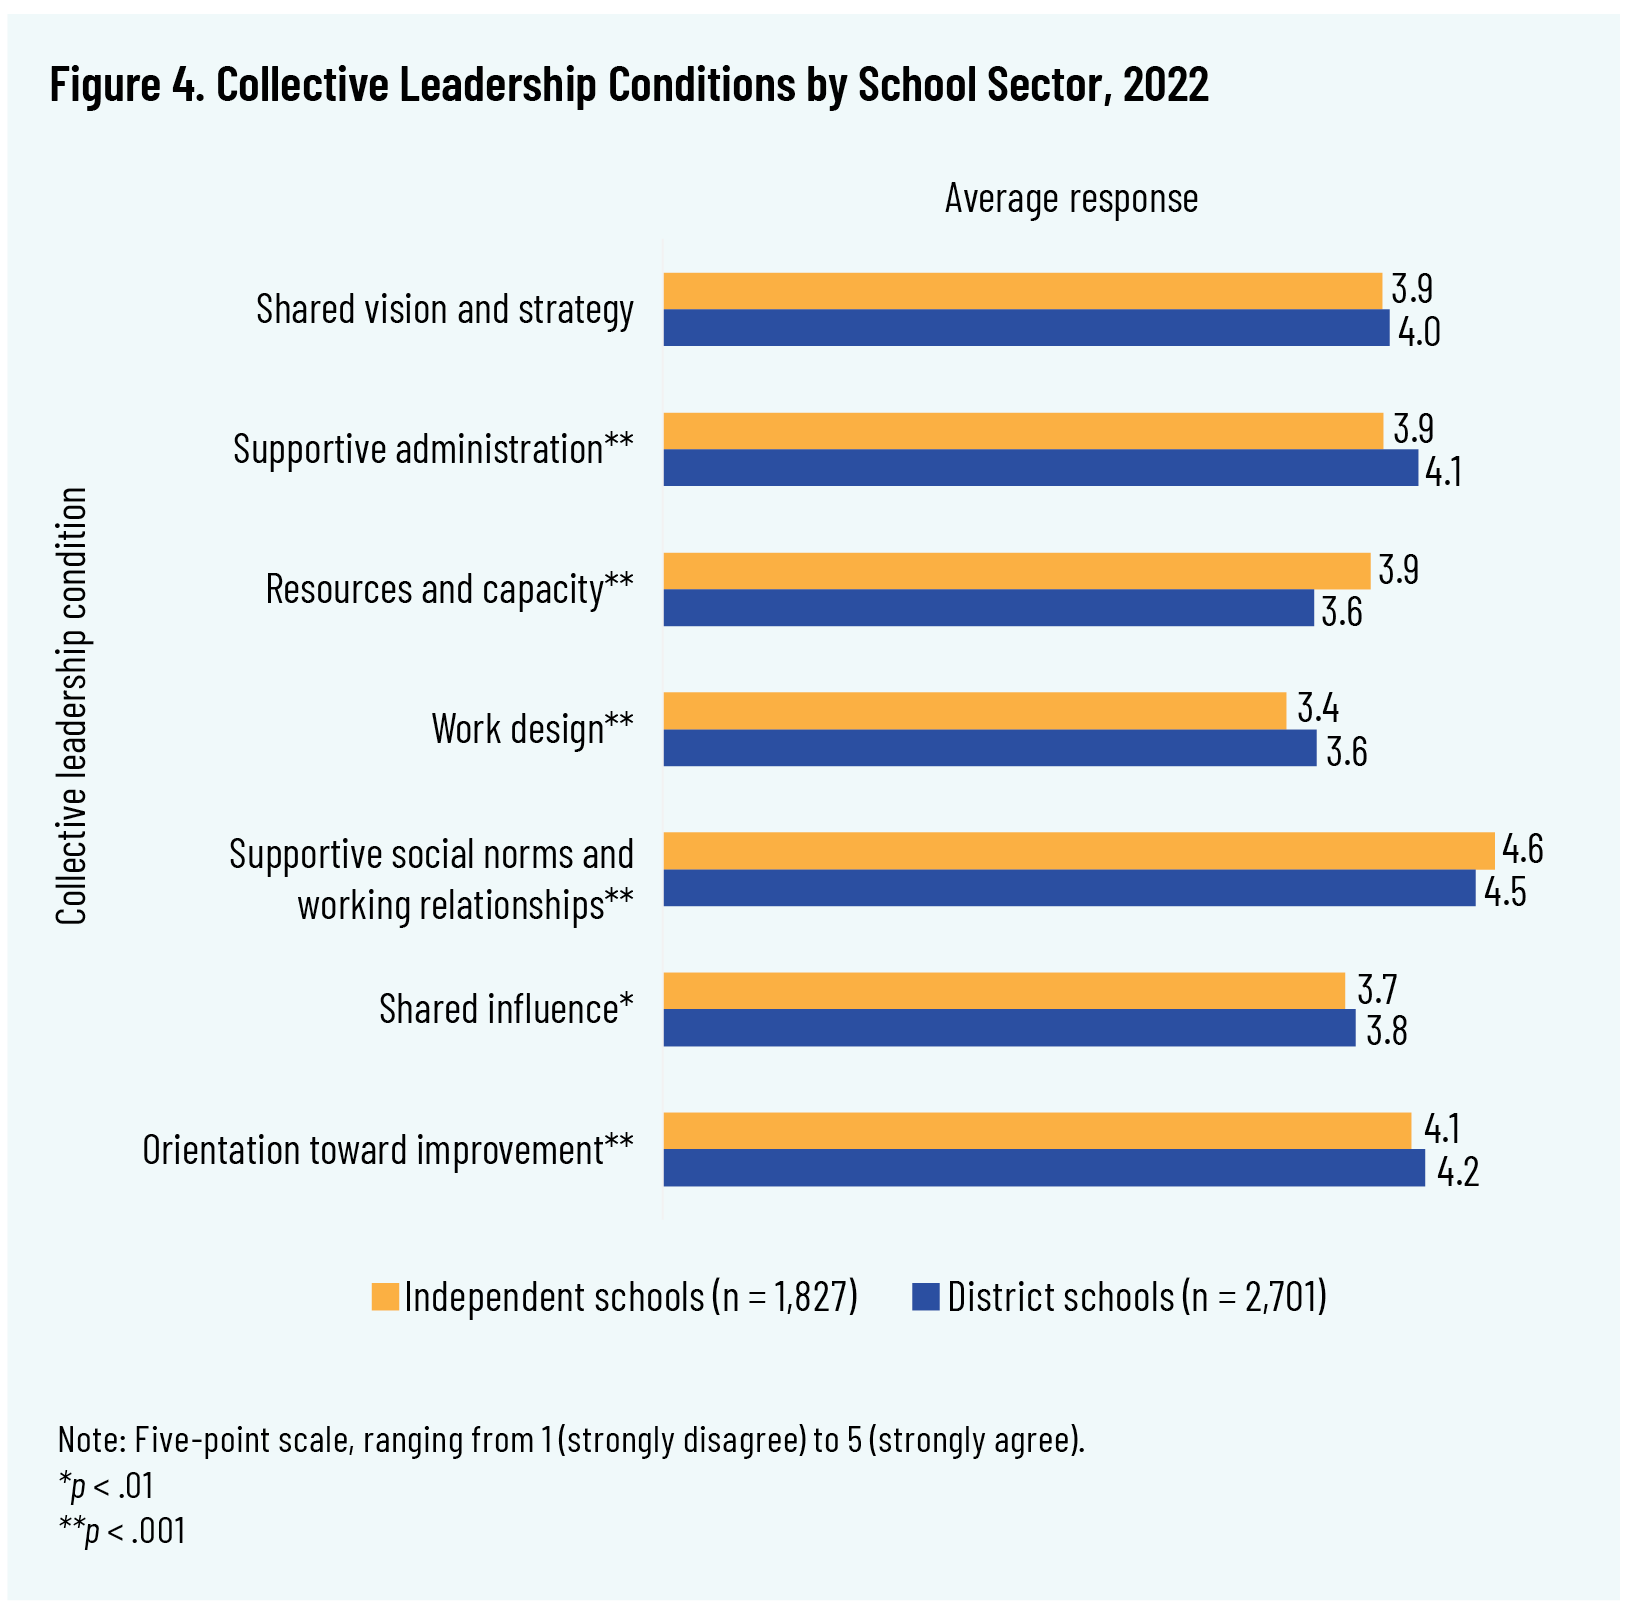 Figure 4: Collective Leadership Conditions by School Sector, 2022